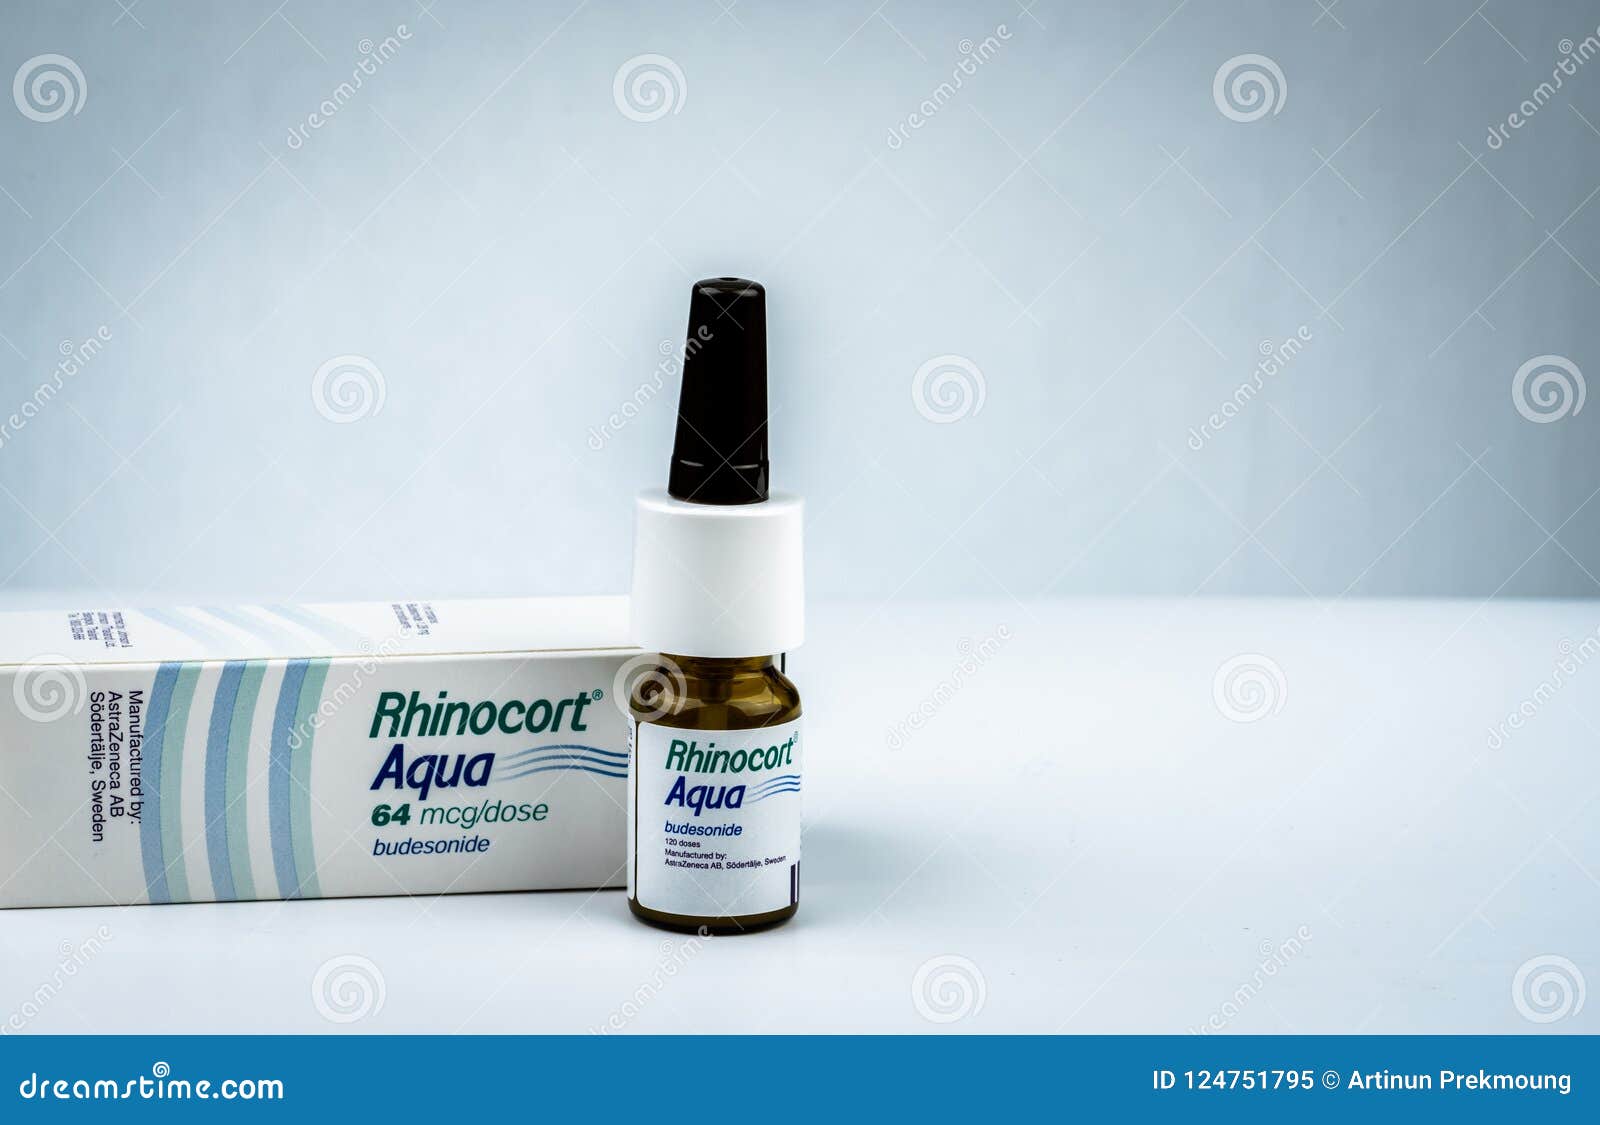 Prednisone price without insurance